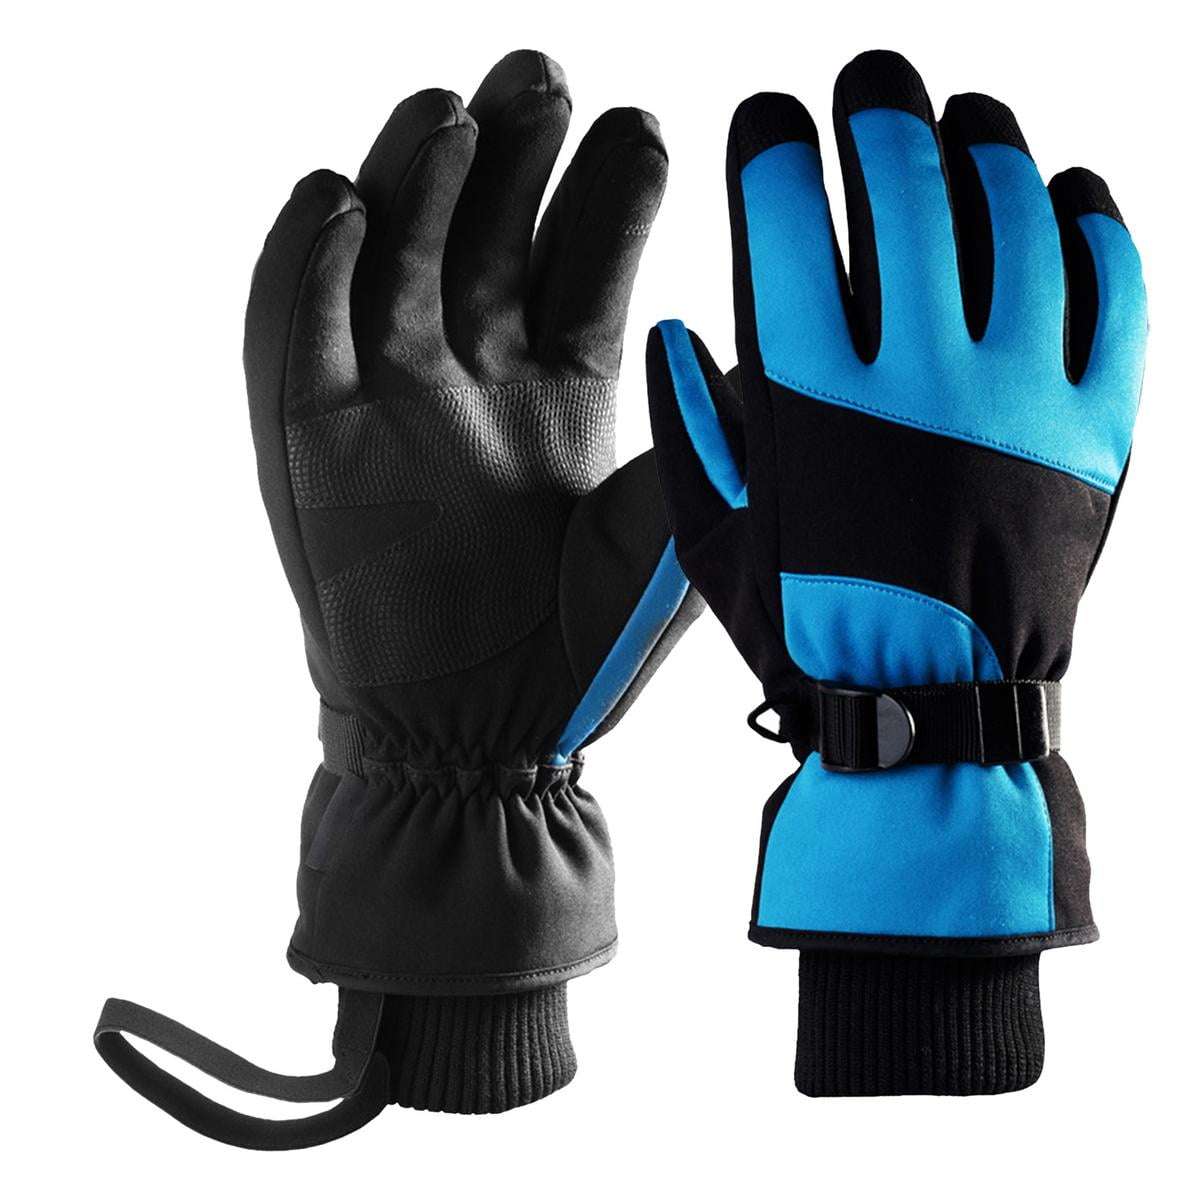 Ski Gloves Waterproof Cold-proof for Snow Gloves for Skiing Snowboarding